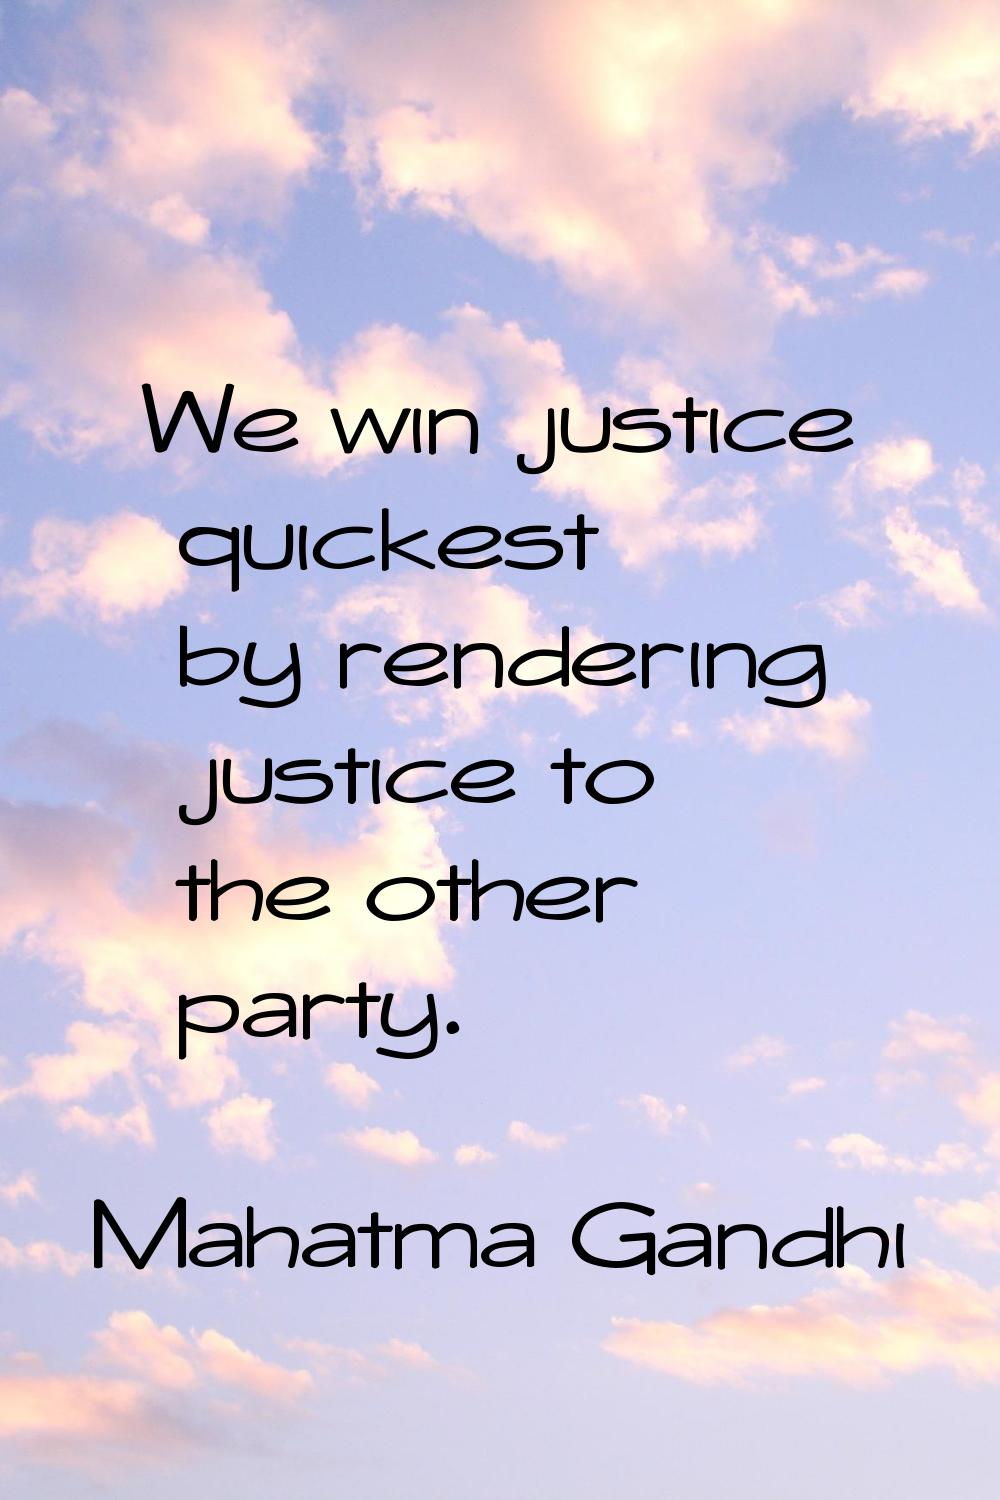 We win justice quickest by rendering justice to the other party.